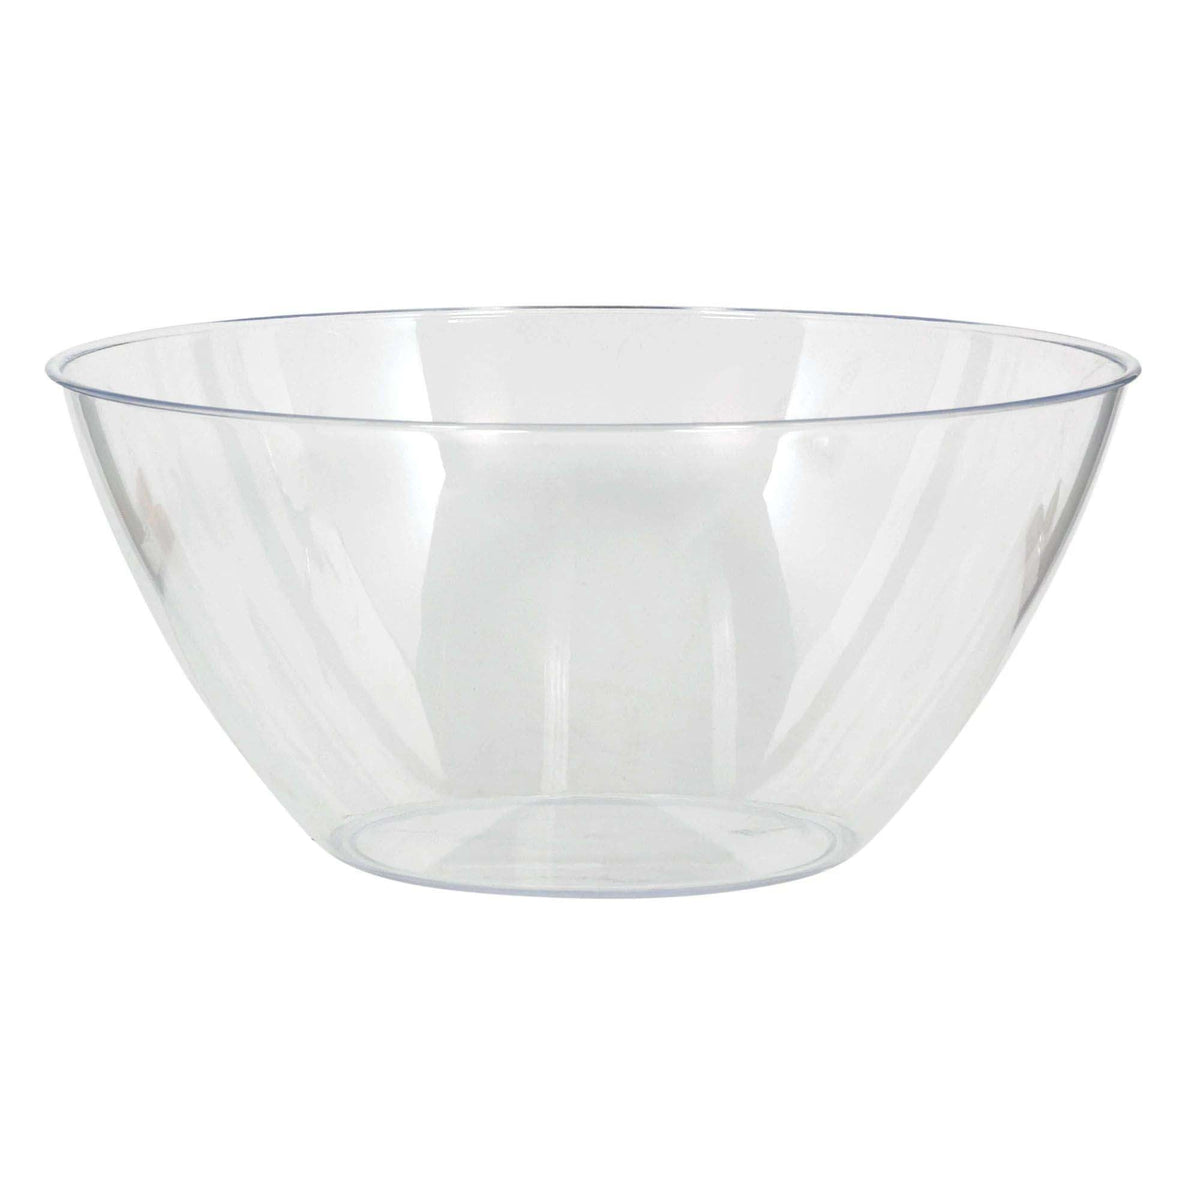 AMSCAN CA Disposable-Plasticware Clear Recyclable Plastic Bowls, 5 Count 192937436240